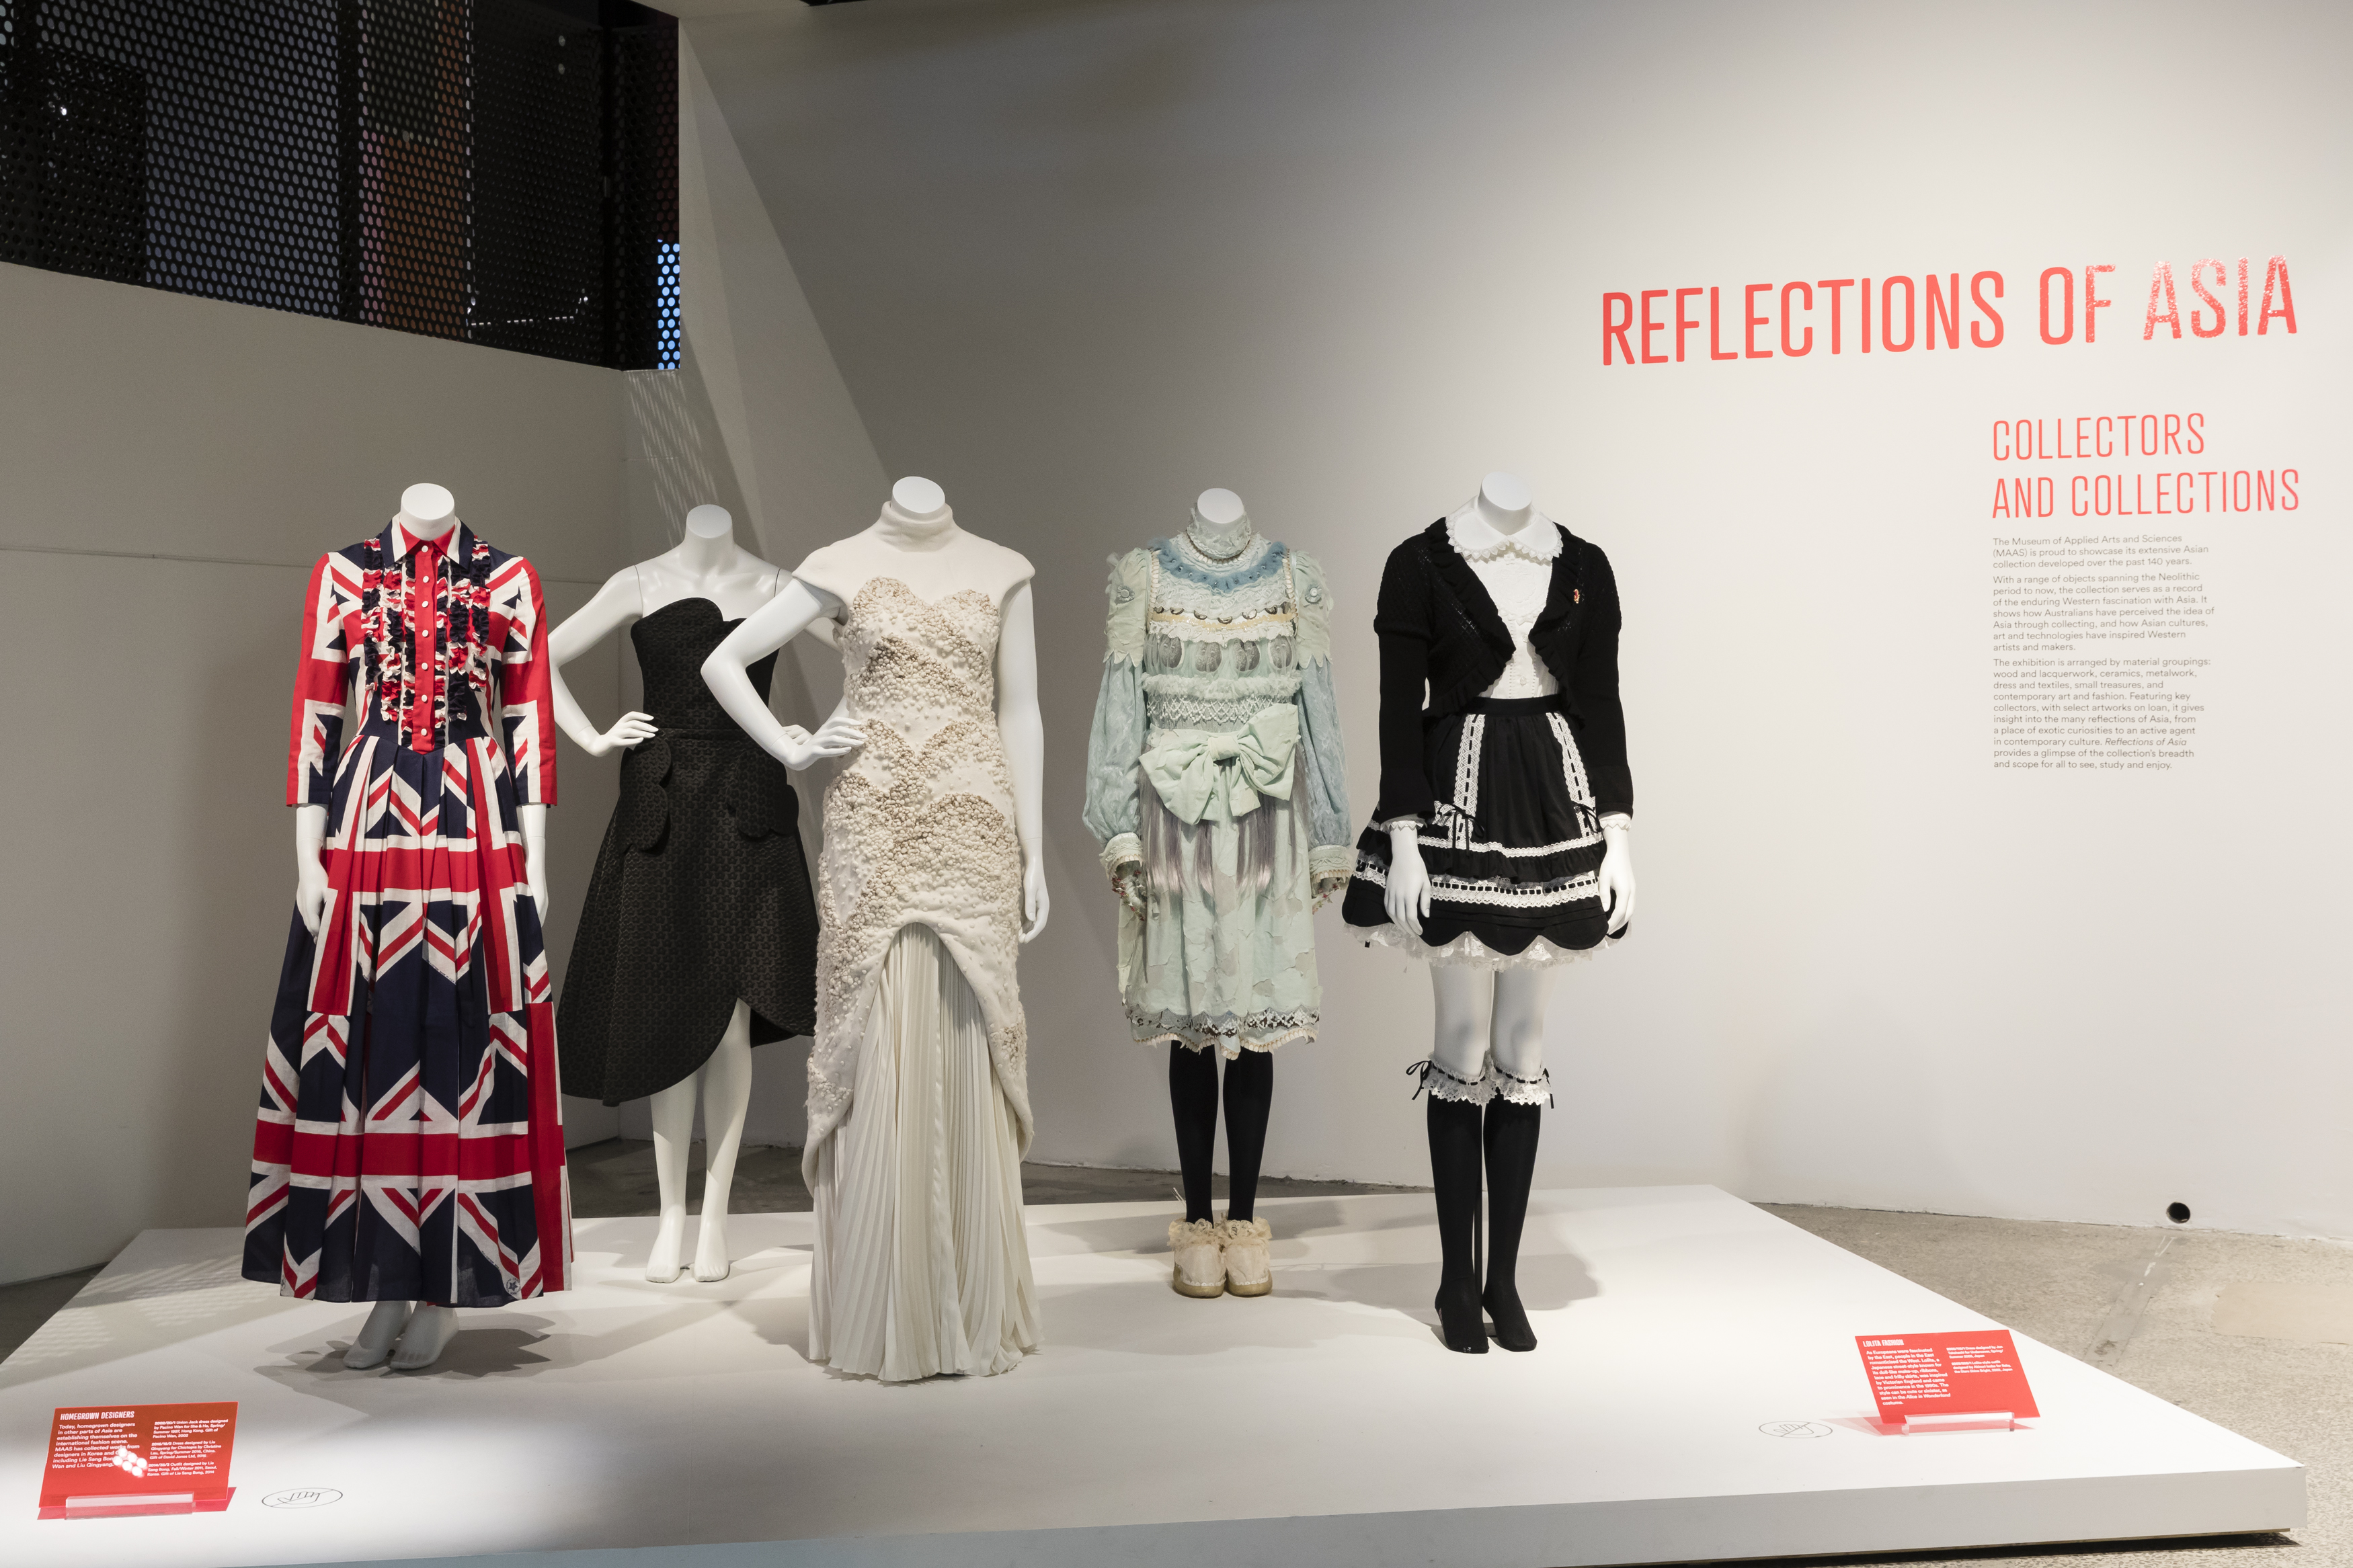 Exhibition view of an open display of contemporary fashion items on five mannequins. There are Victorian style outfits and a dress with Union Jack design.